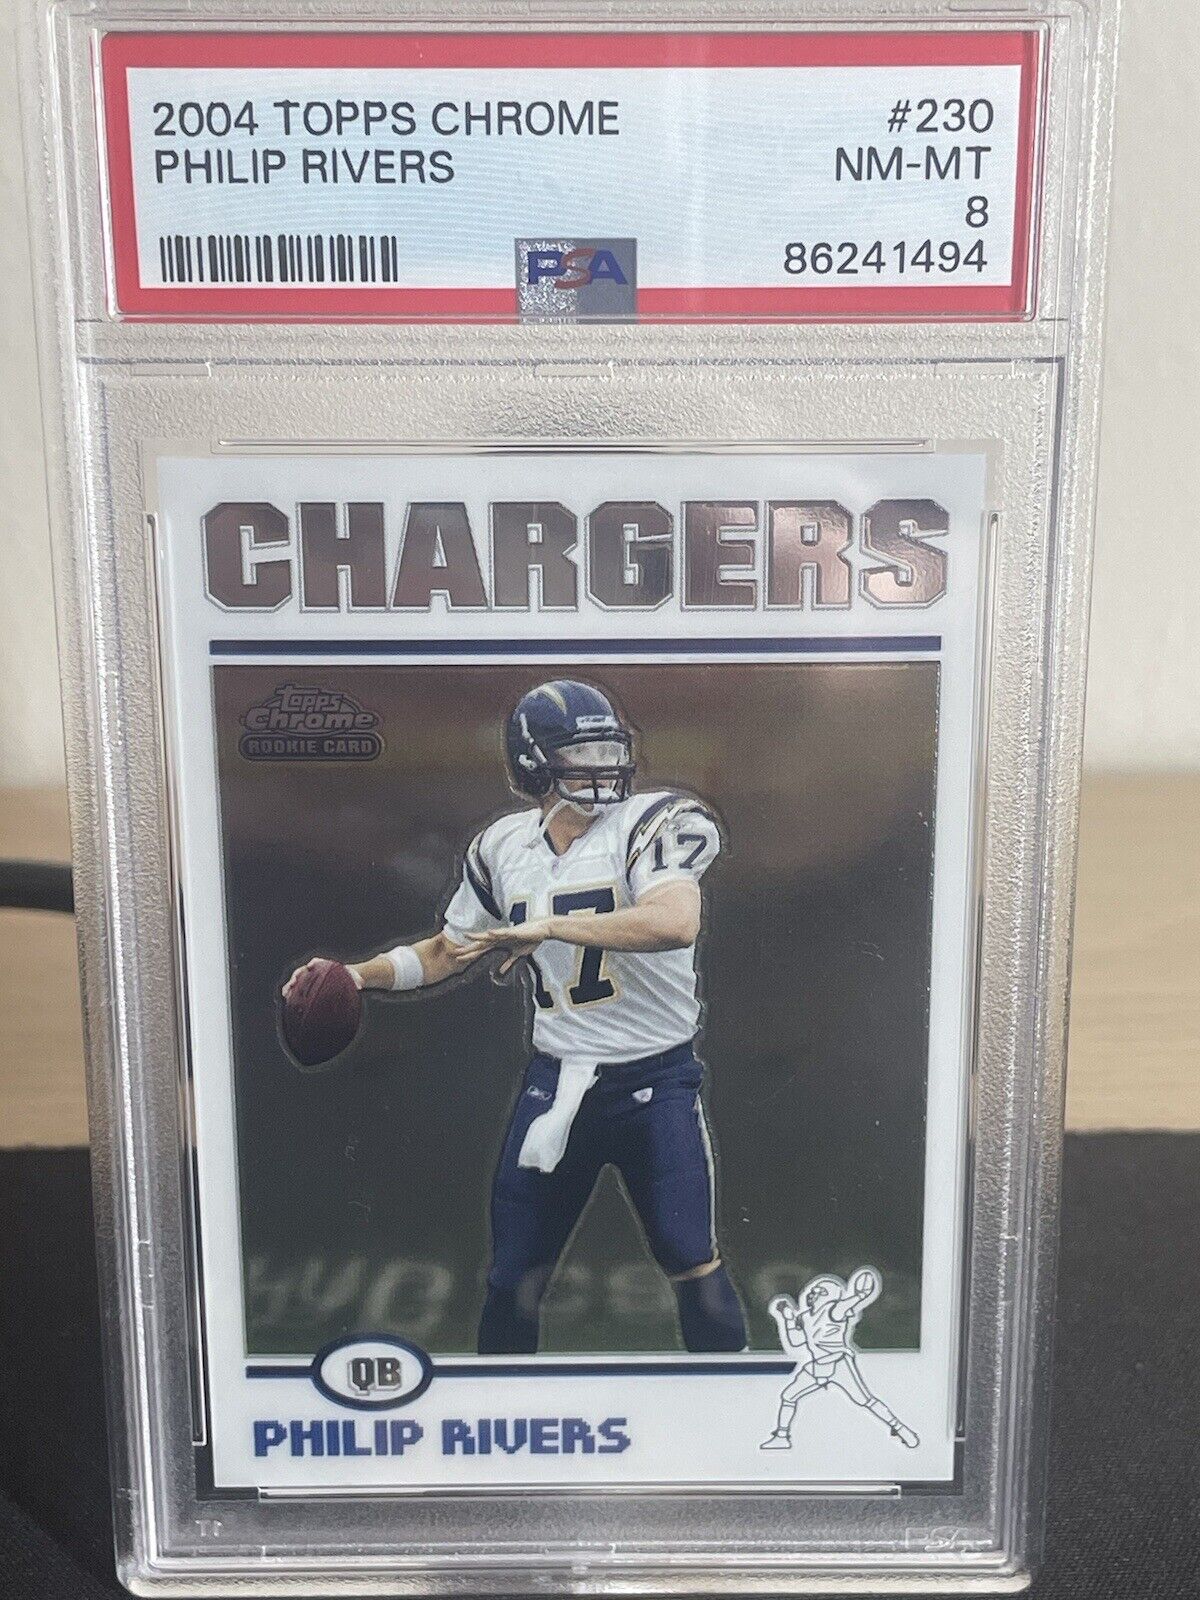 2004 Topps Chrome Philip Rivers Rookie Card- Chargers - #230 - PSA 8